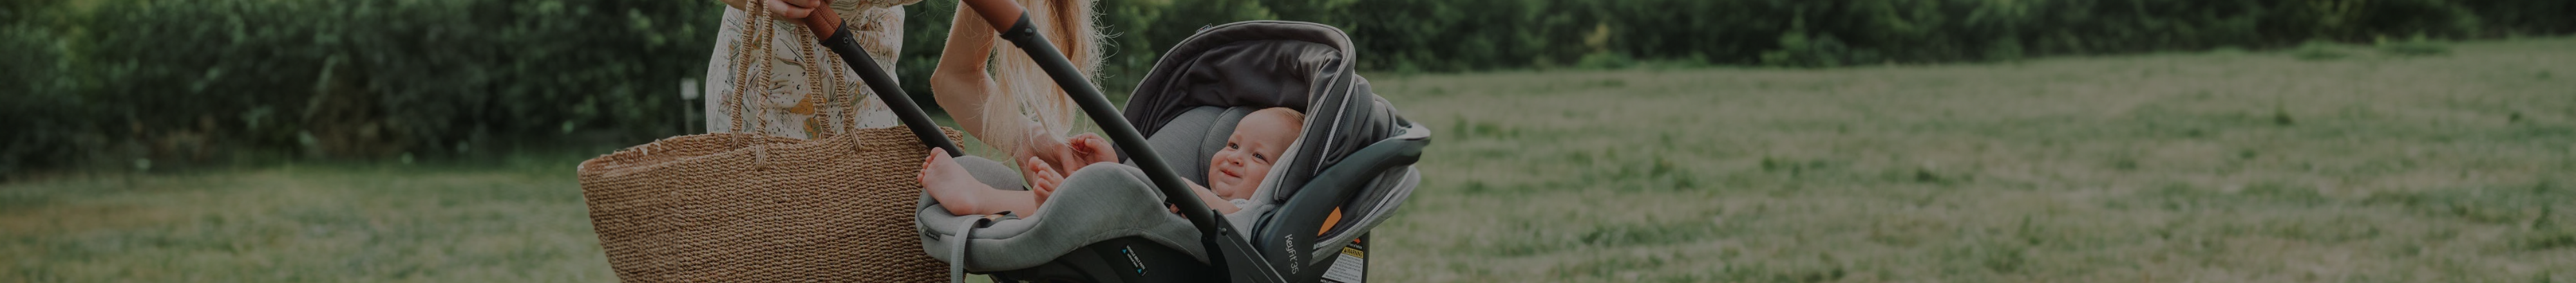 Mom in the park with her baby in a Chicco infant seat travel system